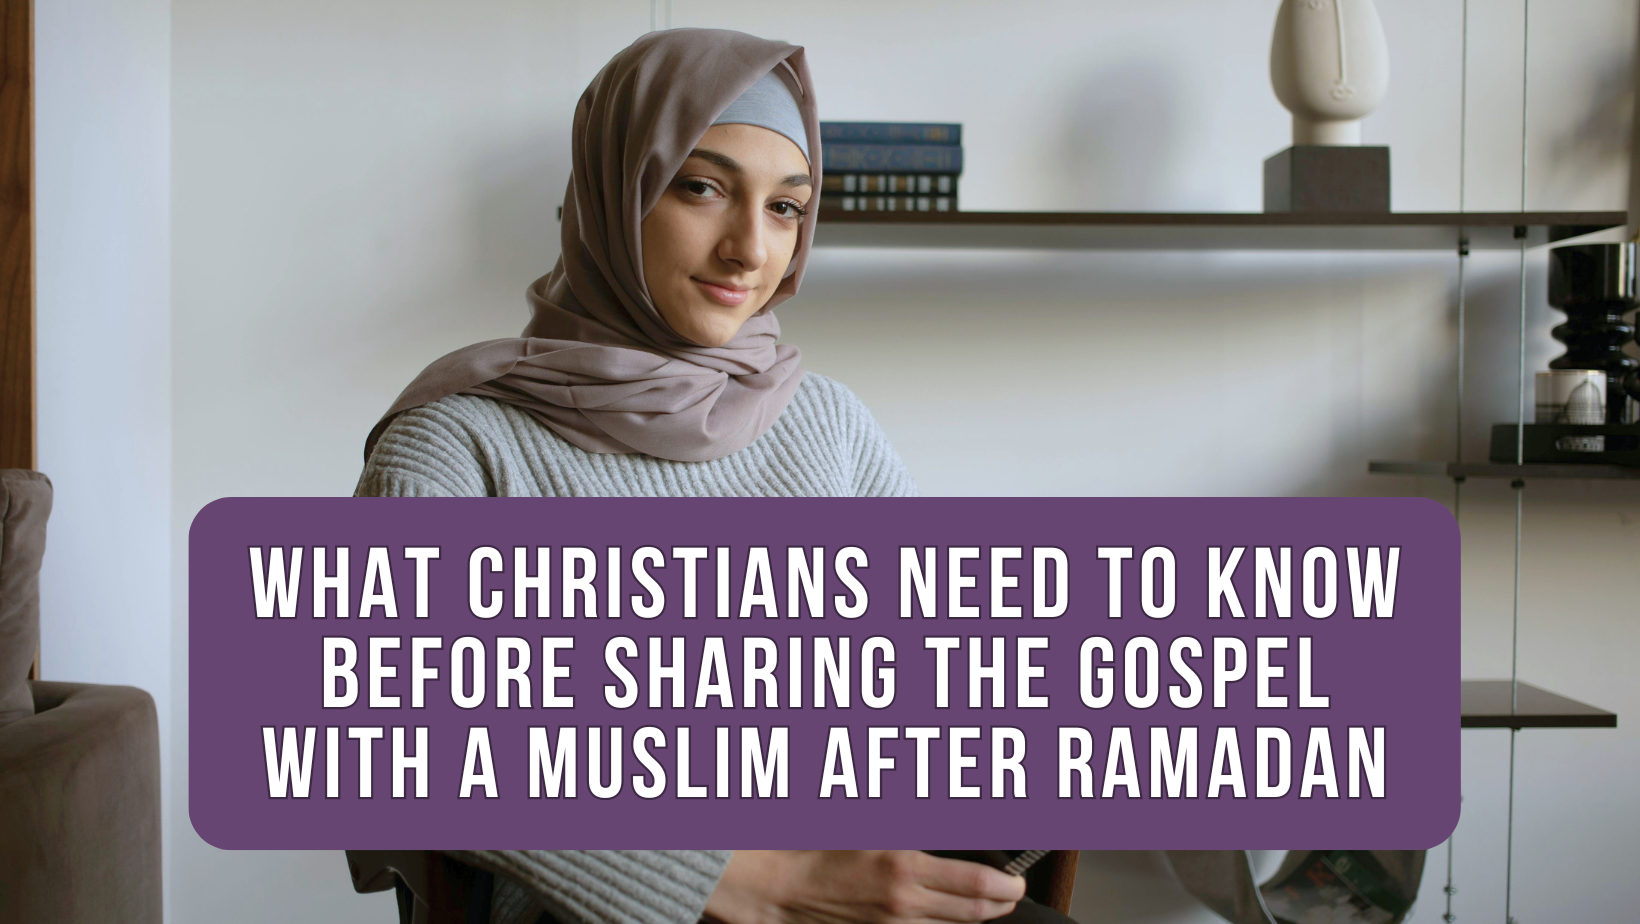 What Christians need to know before sharing the gospel with a Muslim after Ramadan